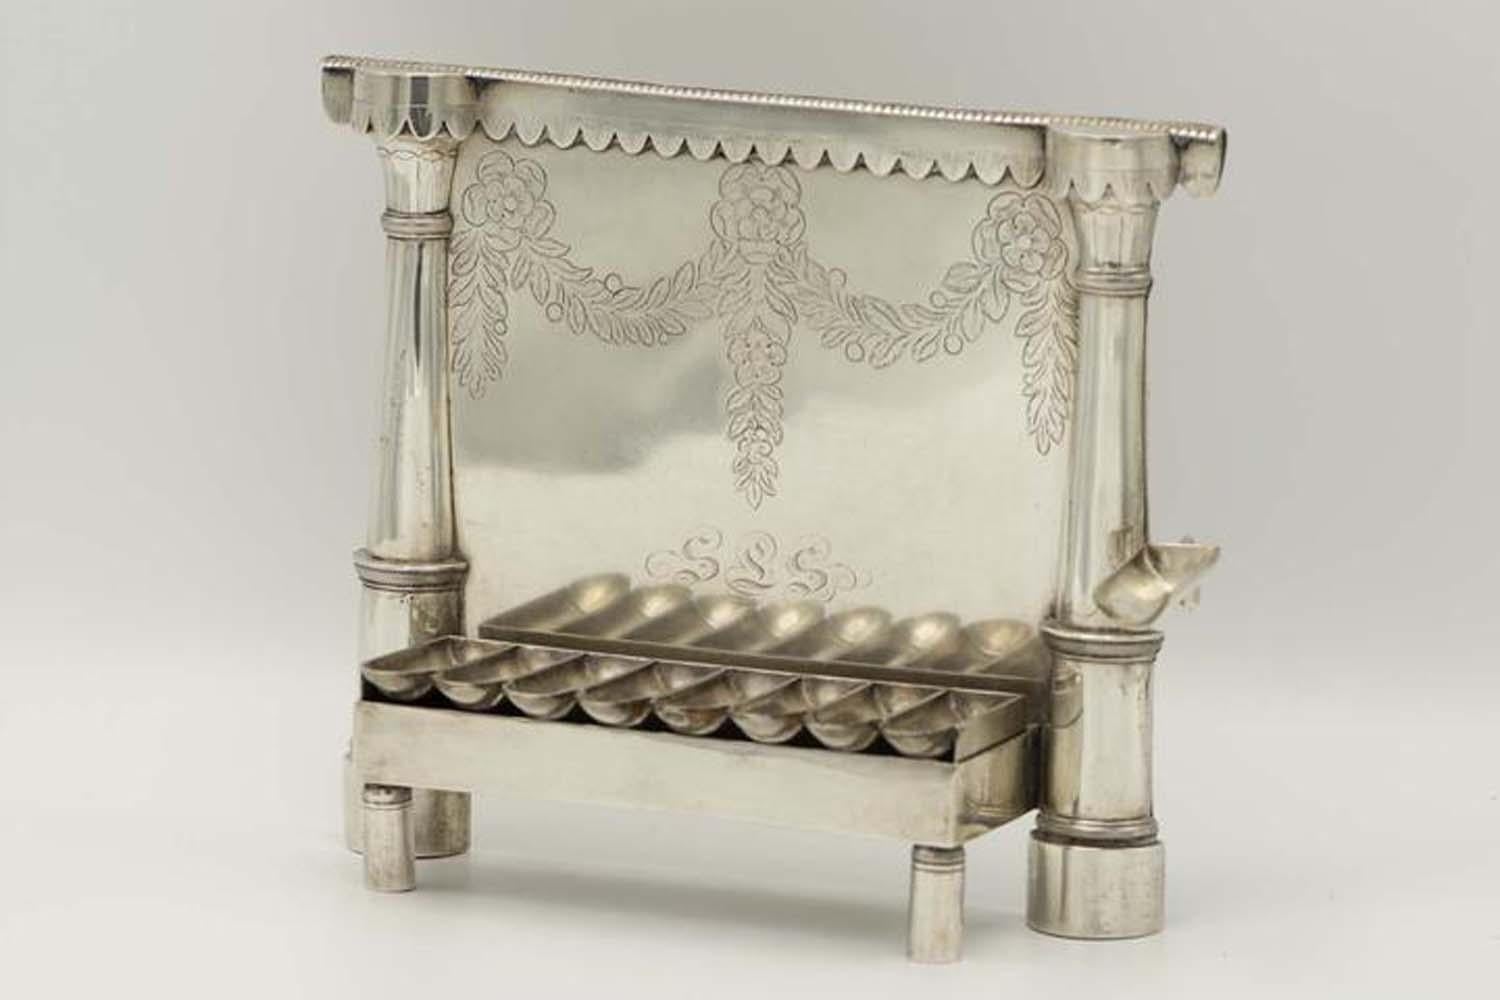 Handmade silver Hanukkah Lamp Menorah,Lemberg, Germany, circa 1770.
Of a bench form with opened oil fonts, on cylindrical feet, the backplate is engraved with flowers, leaves and the owner's name initials.
Bordered by pair of 